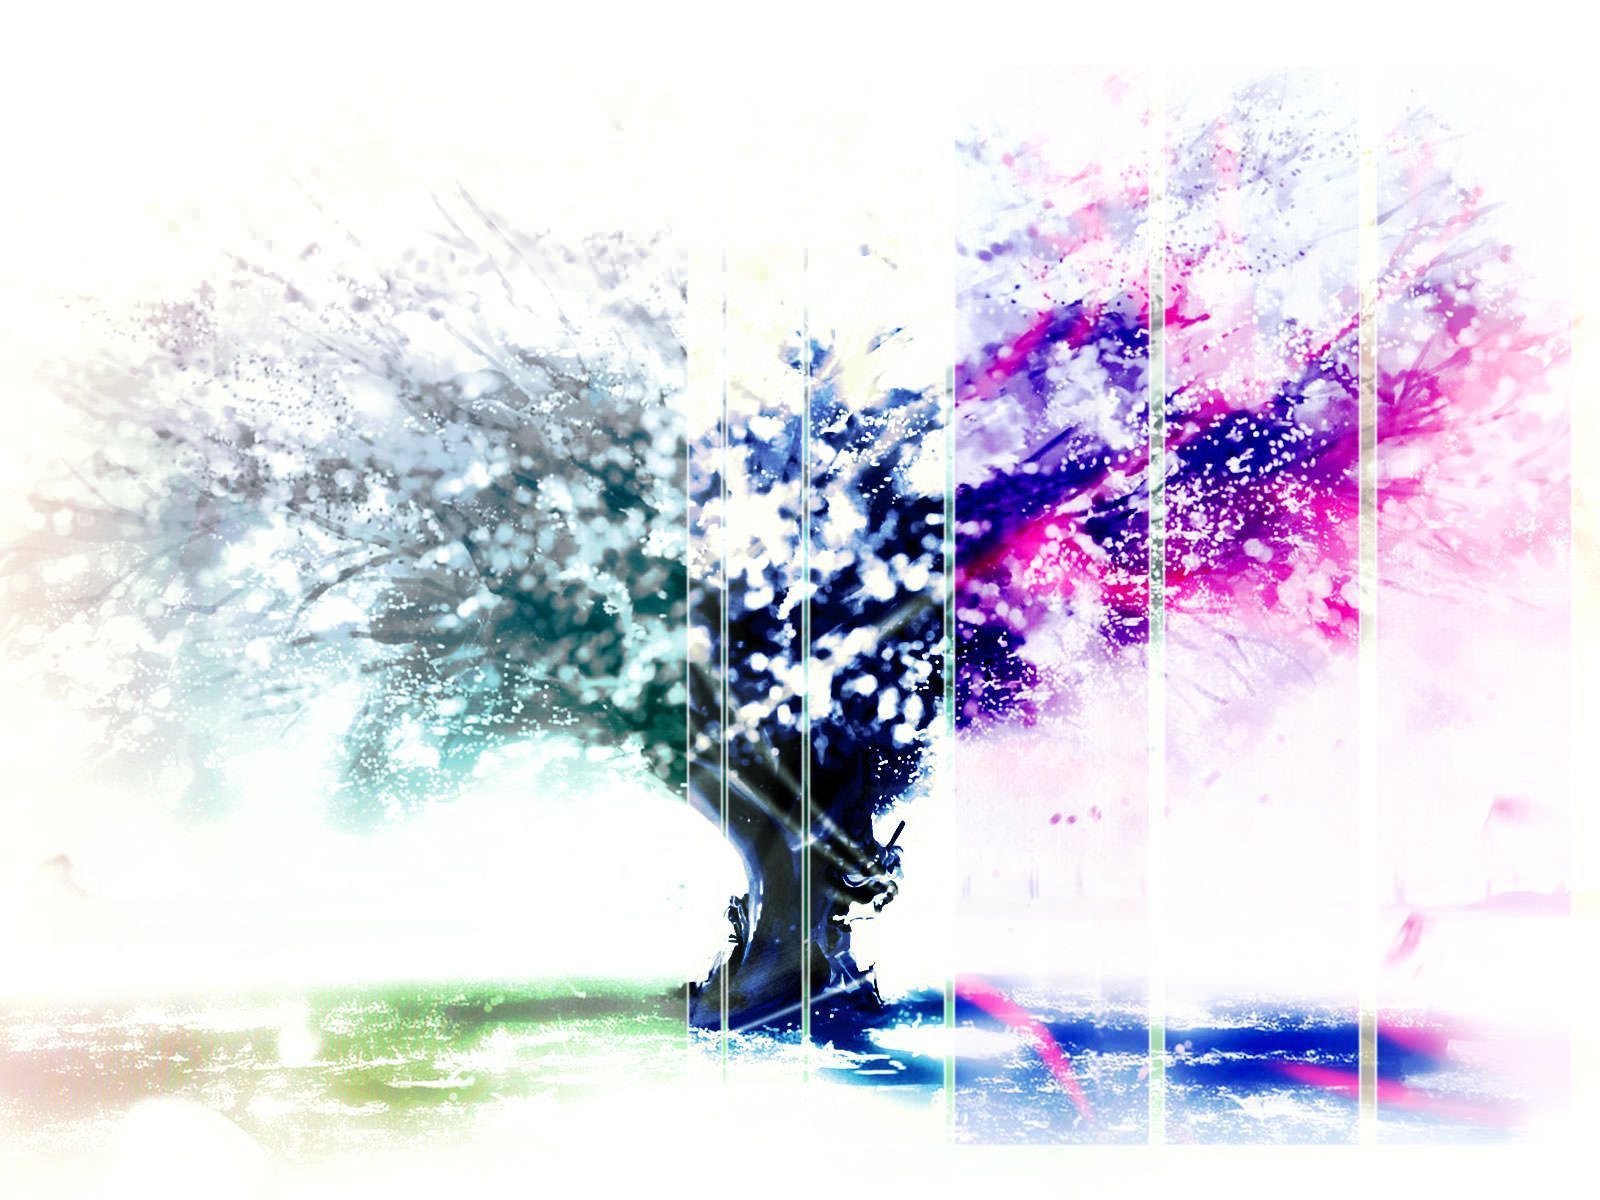 Abstract Tree Backgrounds HD Wallpapers - HD Wallpapers Inx